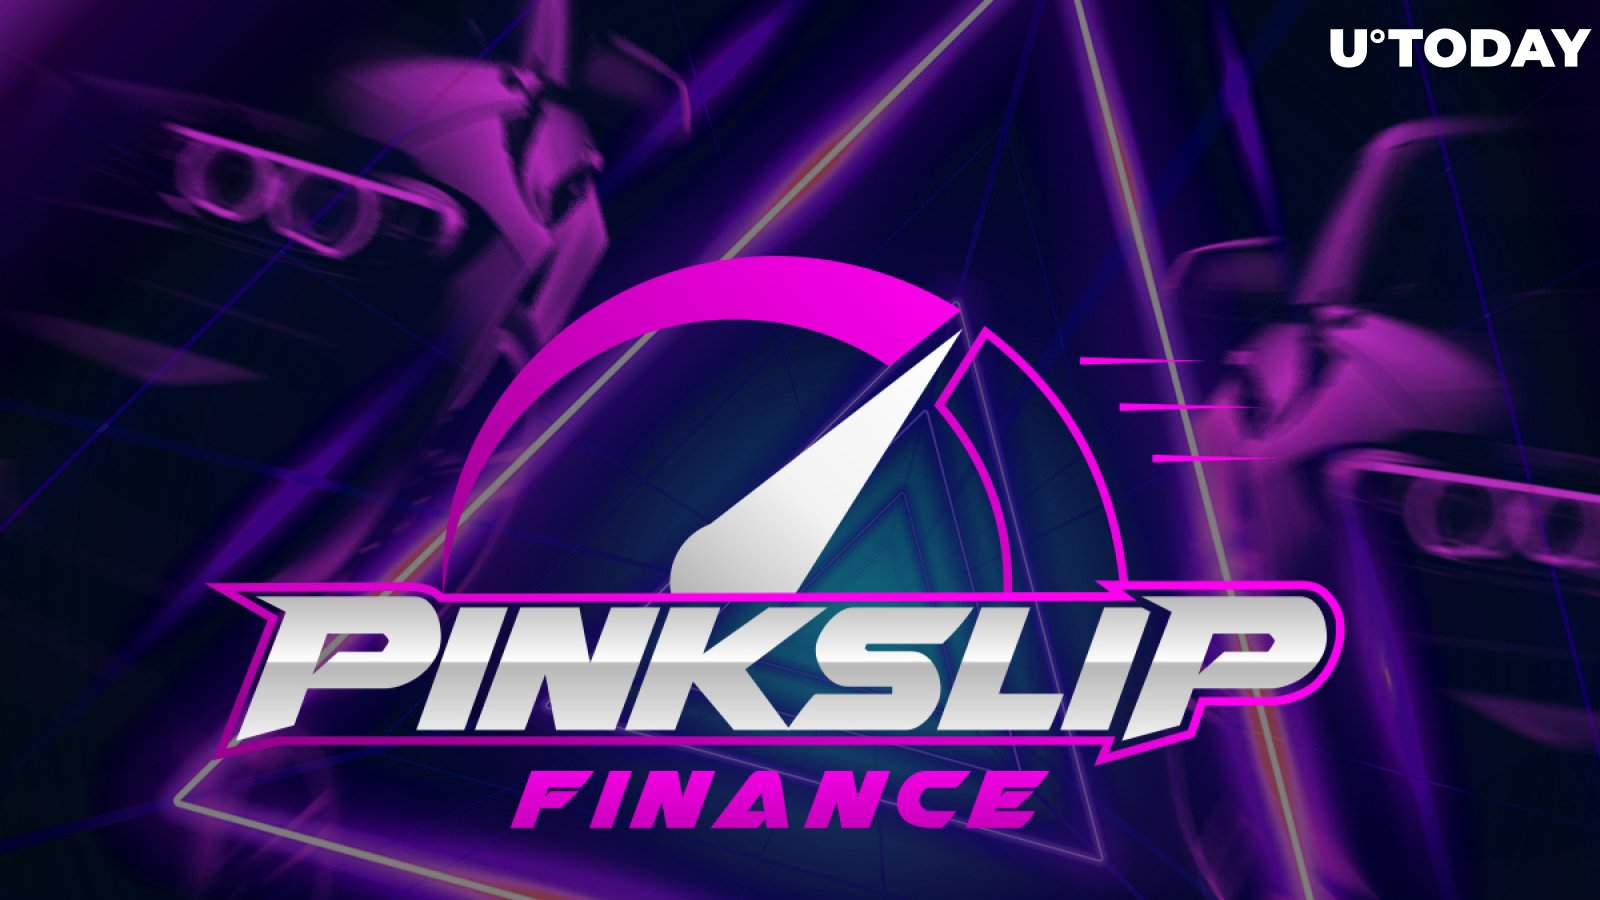 Pinkslip Finance to Hold Public Sale on August 25